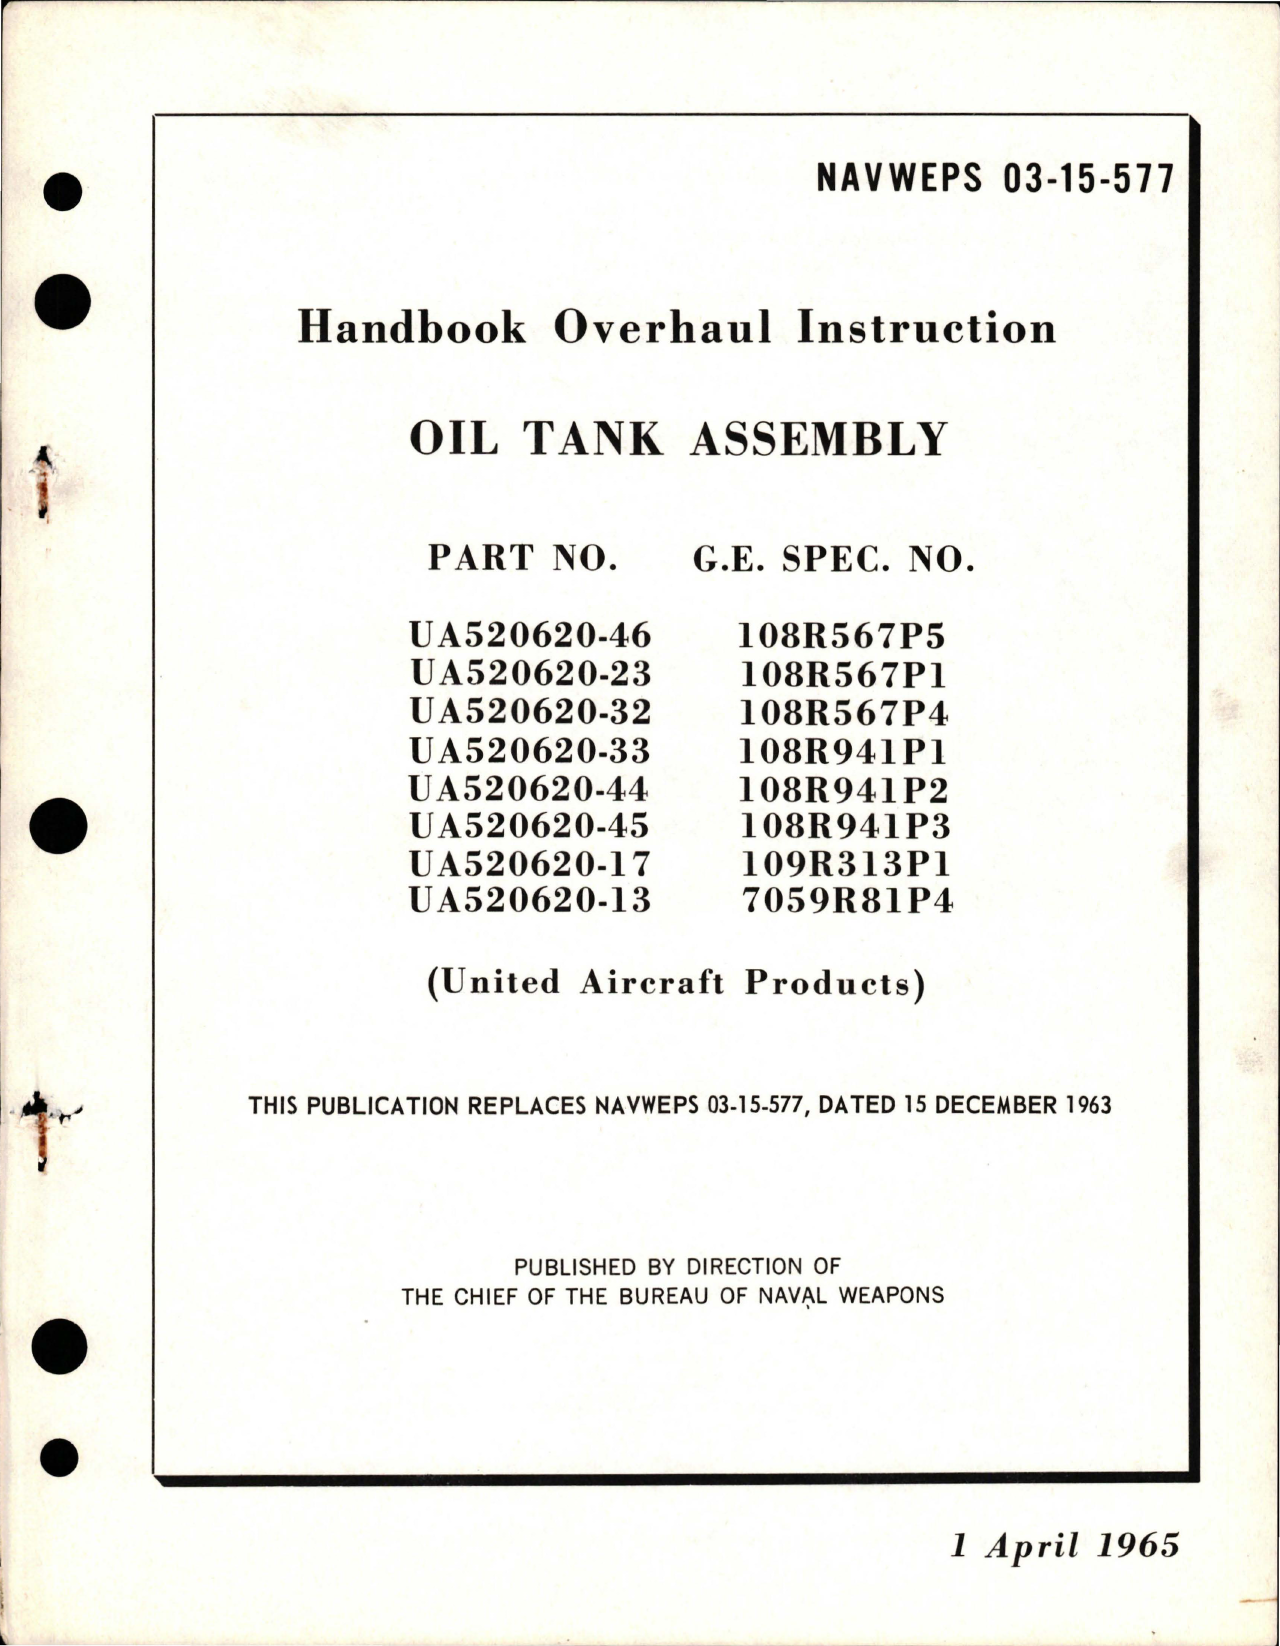 Sample page 1 from AirCorps Library document: Overhaul Instructions for Oil Tank Assembly